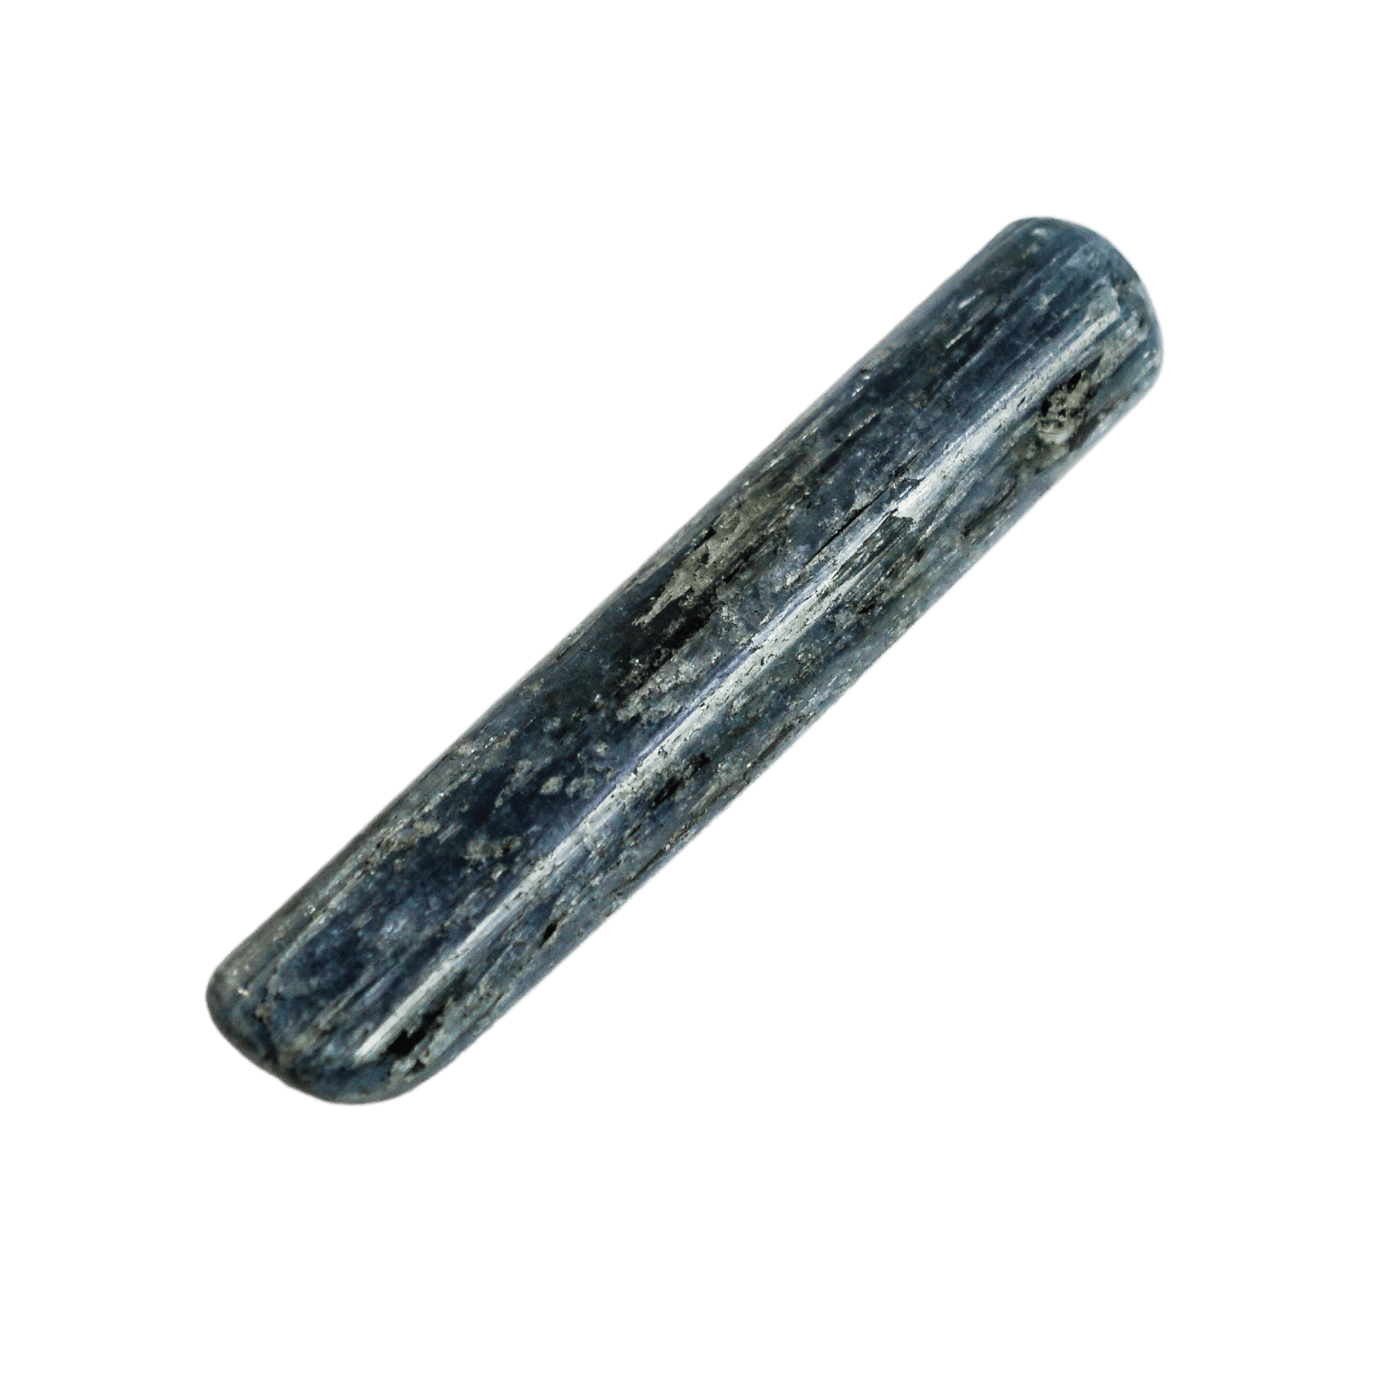 Genuine Blue Kyanite crystal in a mini wand shape by Energy Muse